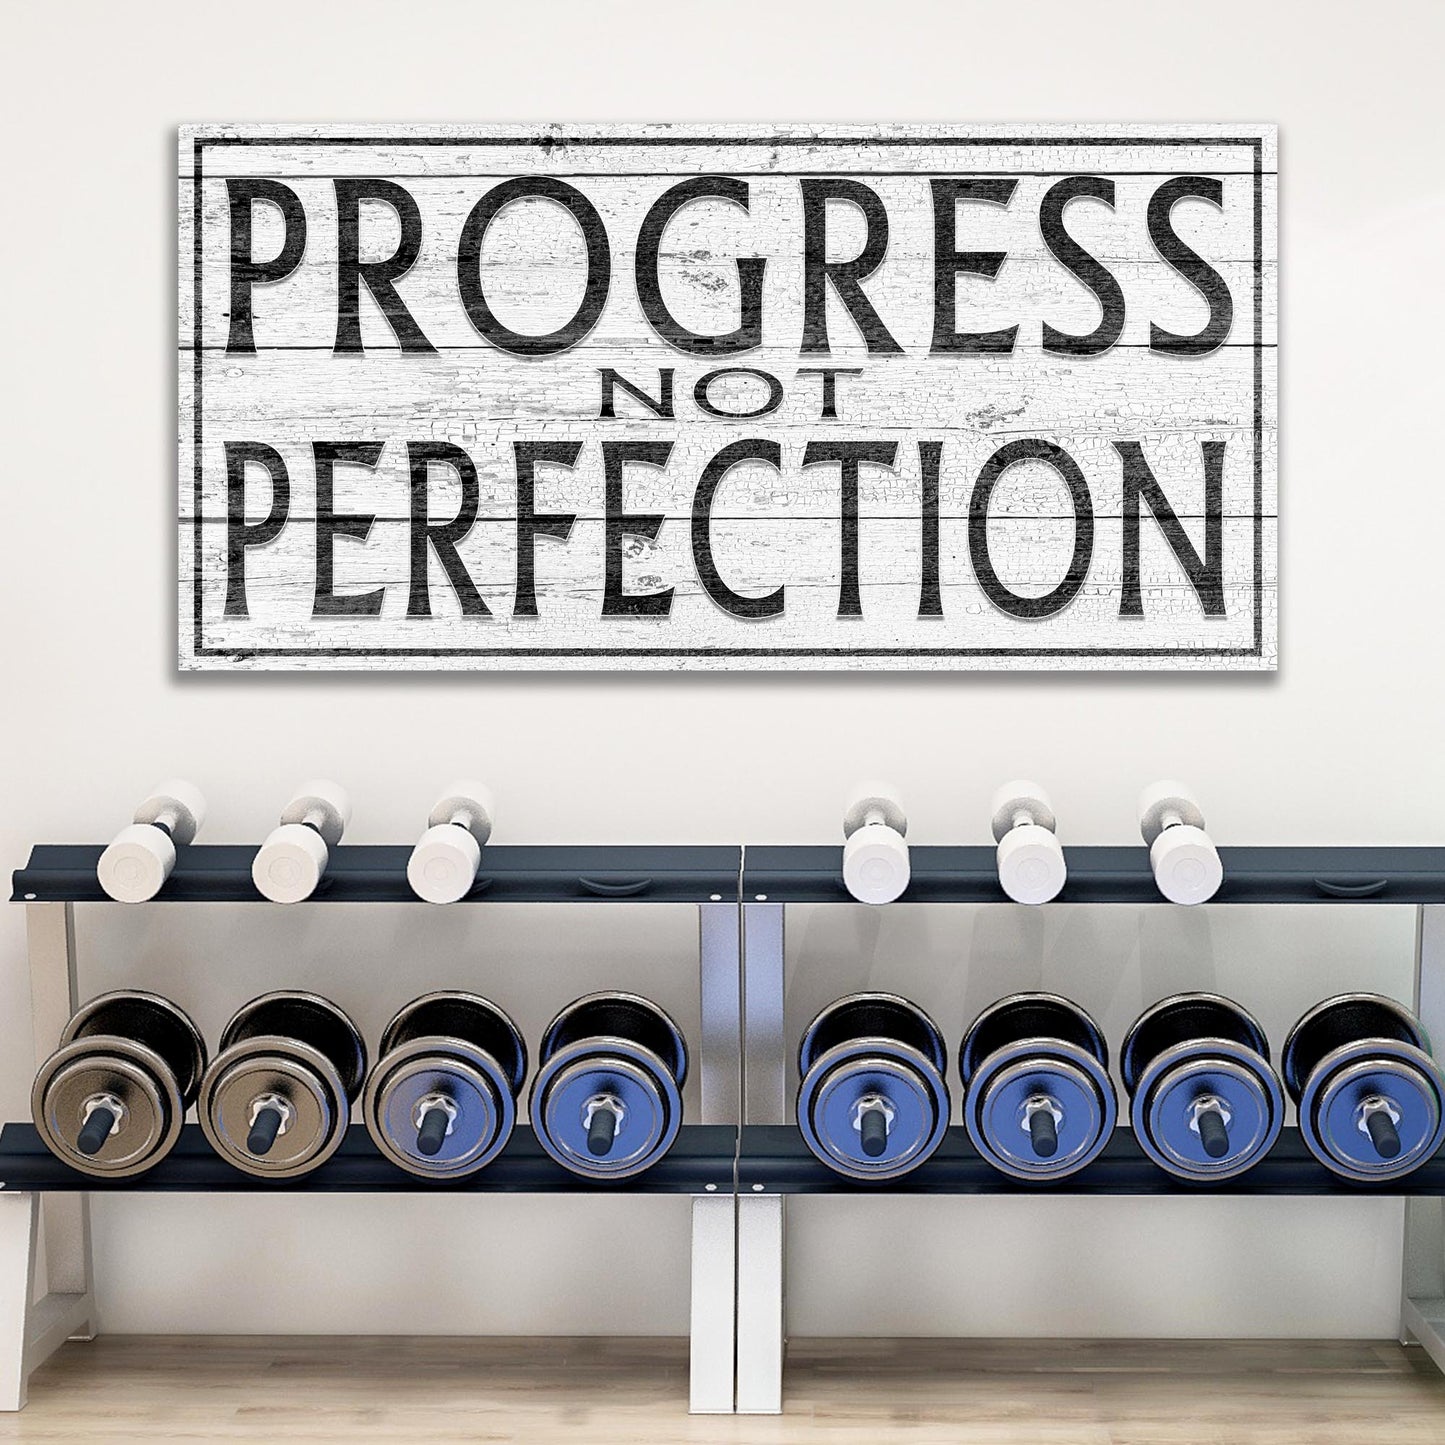 Progress Not Perfection Sign - Image by Tailored Canvases